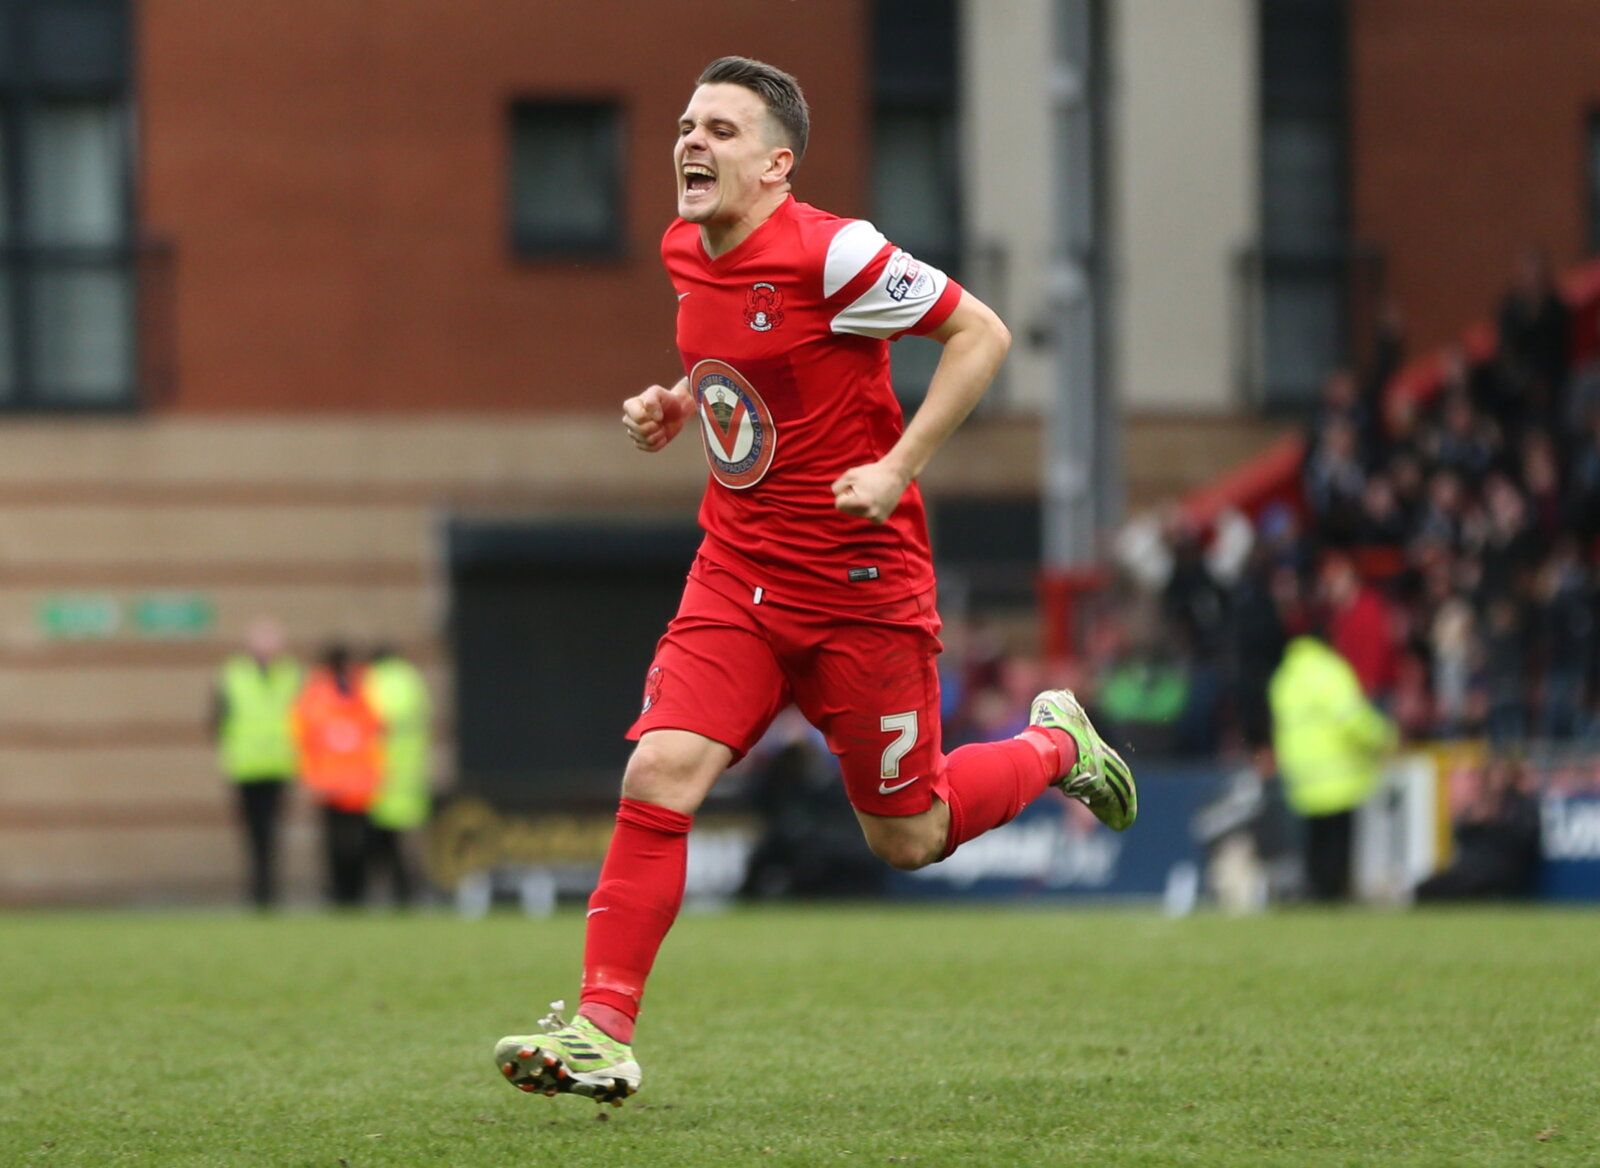 Football - Leyton Orient v Port Vale - Sky Bet Football League One - The Matchroom Stadium, Brisbane Road - 14/15 - 28/3/15 
Dean Cox celebrates scoring the third goal for Leyton Orient 
Mandatory Credit: Action Images / Alex Morton 
EDITORIAL USE ONLY. No use wits unauthorized audio, video, data, fixture lists, club/league logos or 